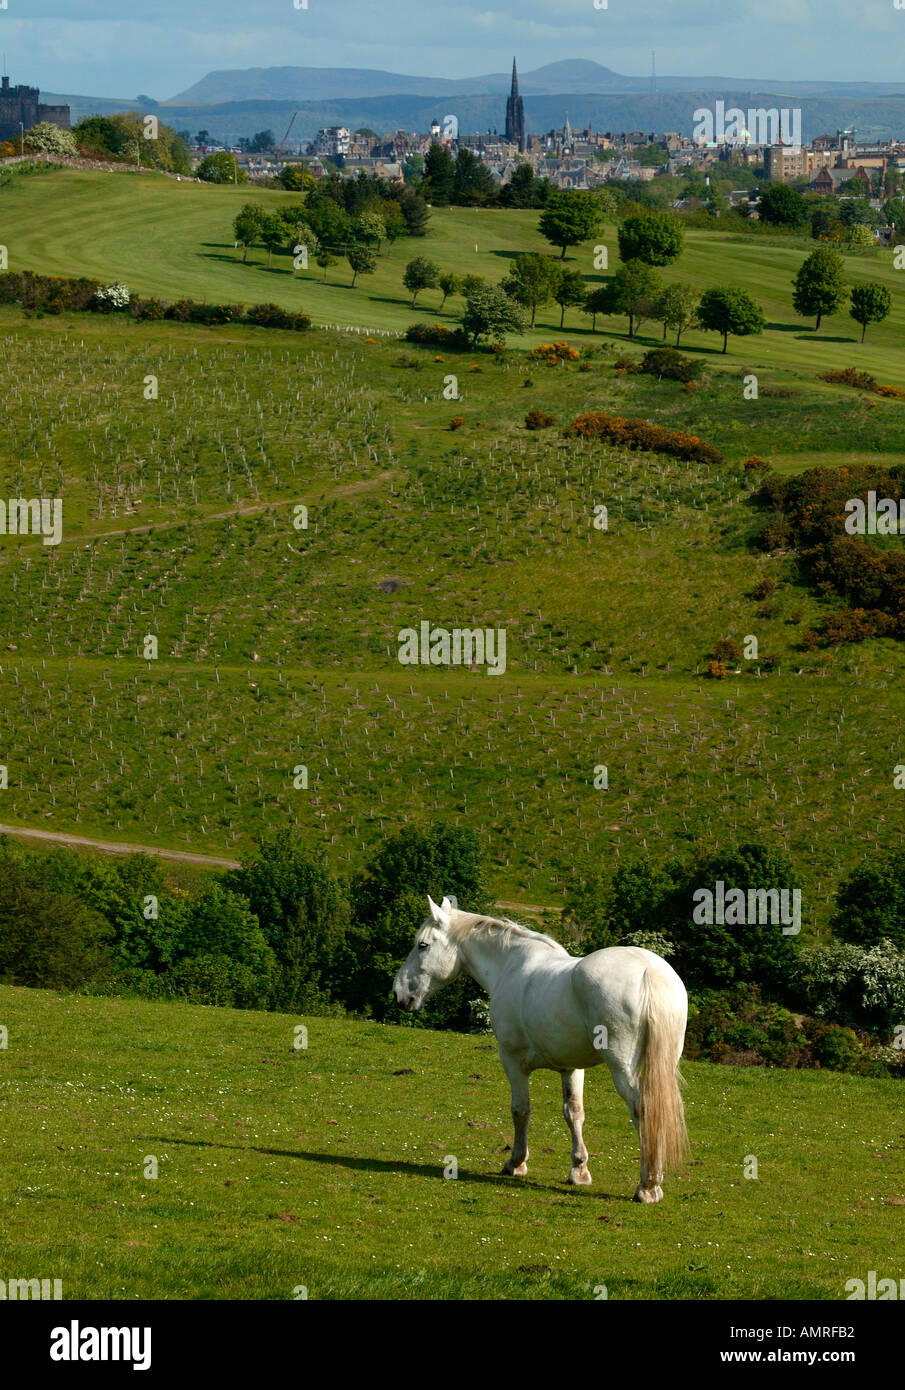 White horse standing in green field with a view of Edinburgh City centre in the background Stock Photo